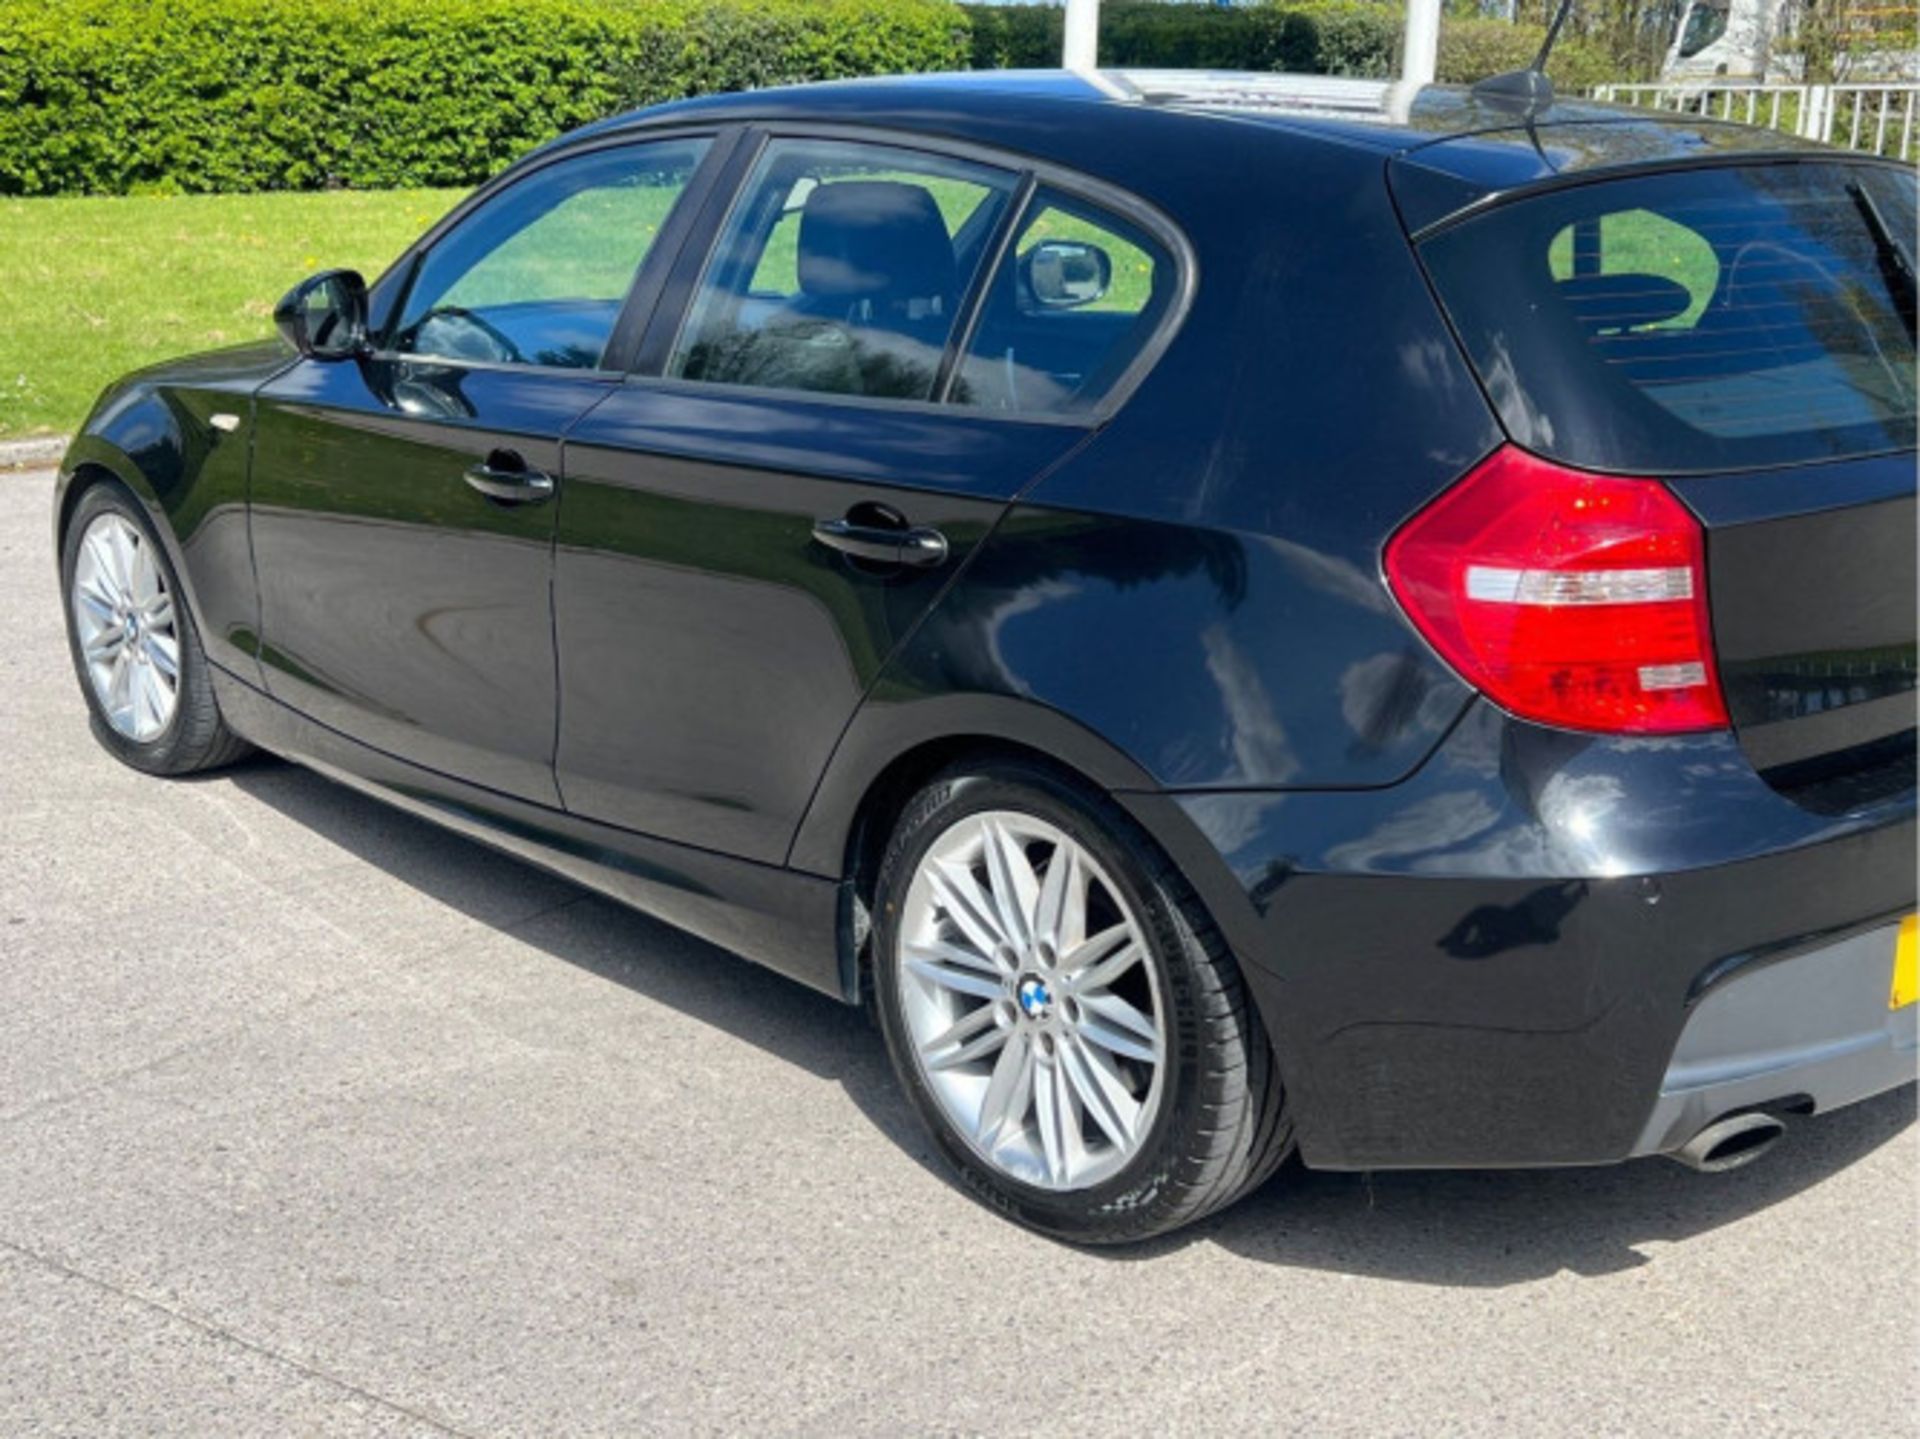 BMW 1 SERIES 2.0 118D M SPORT EURO 5 5DR (2010) - Image 50 of 58